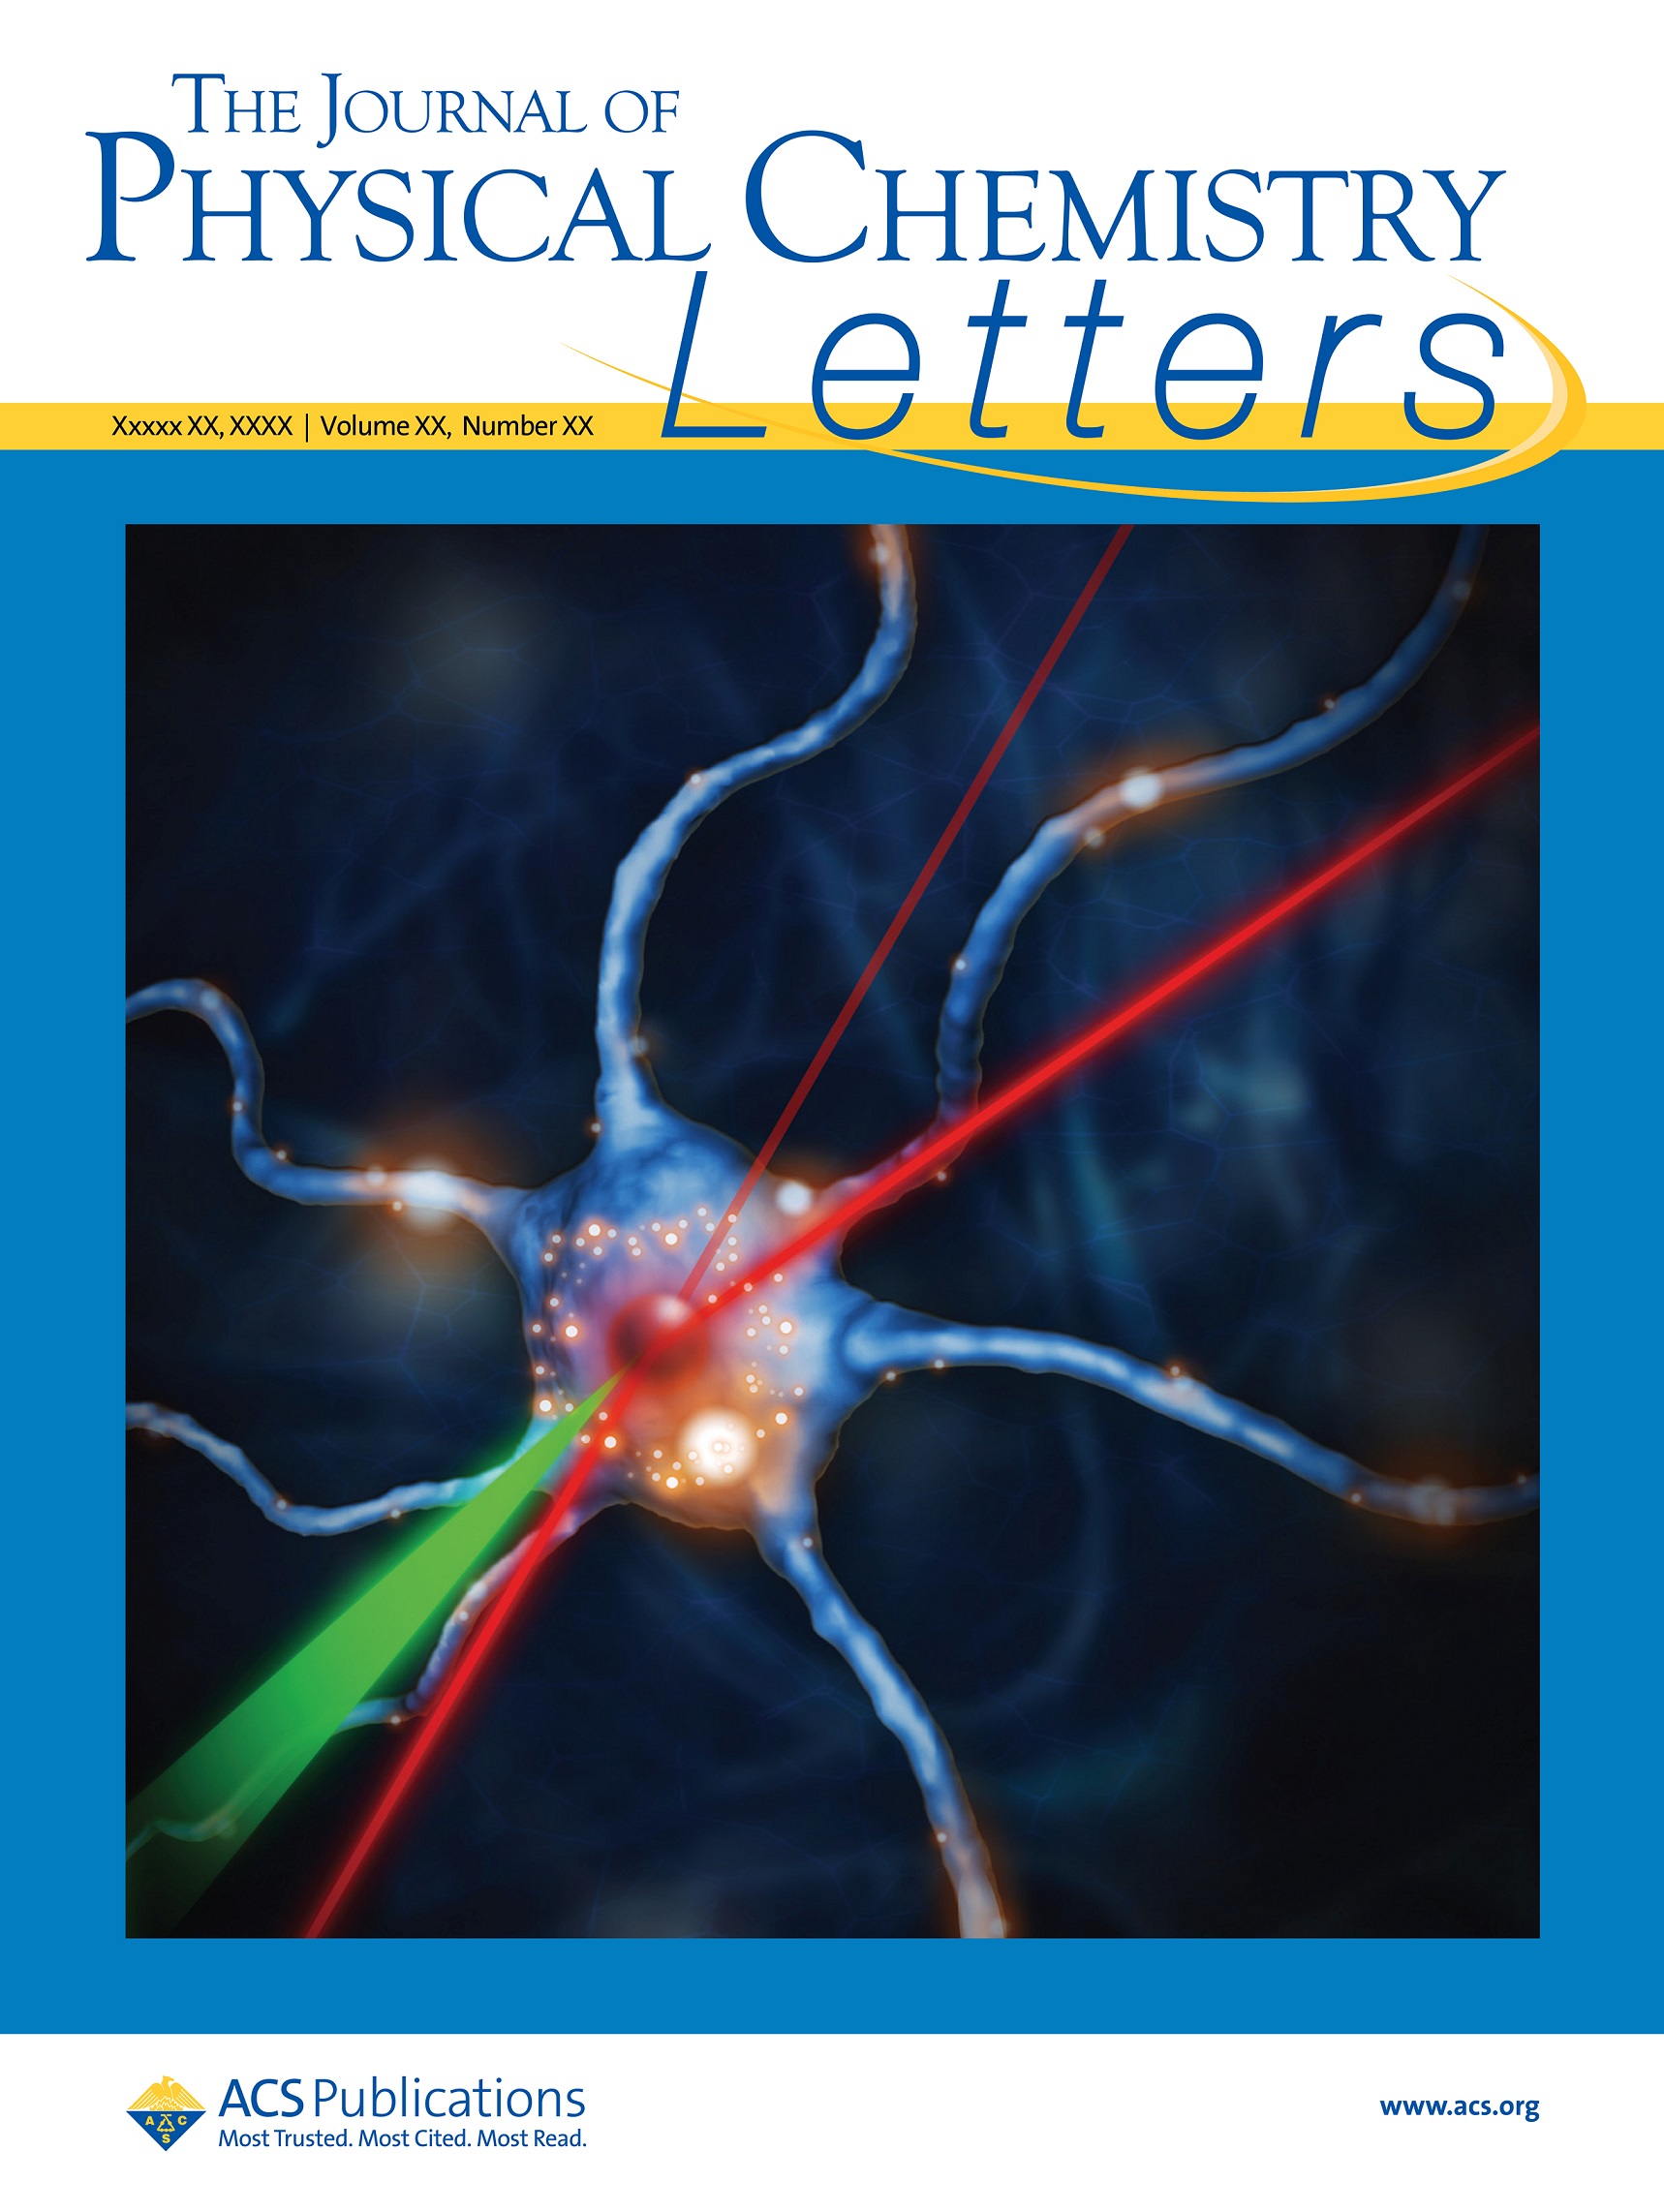 Selected as a supplementary cover for 'The Journal of Physical Chemistry Letters'!